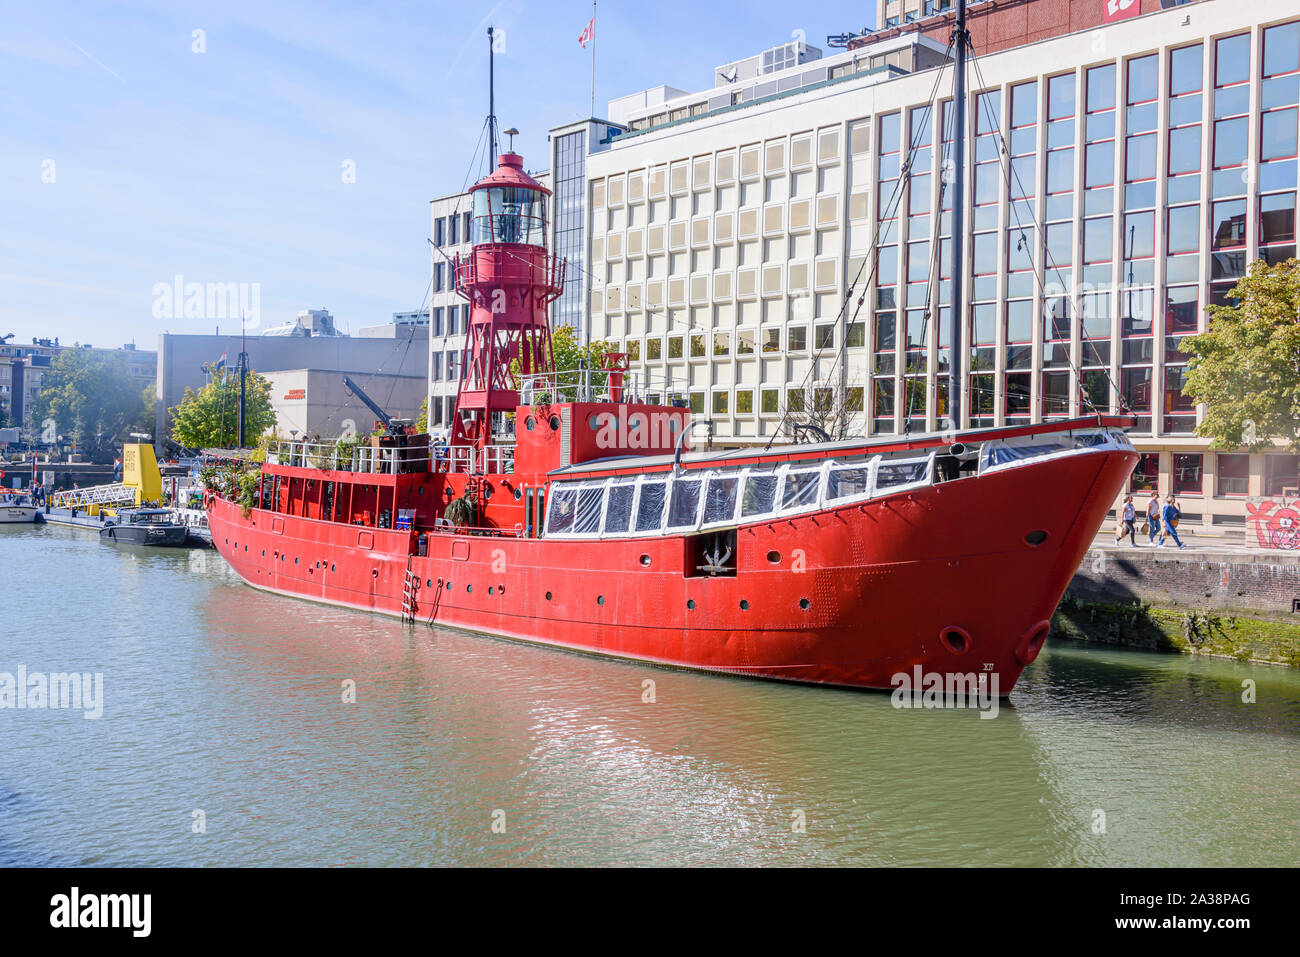 Vessel 11, formerly a lightship, now a restaurant, music venue, and even has floating wood-fired heated spas.  Rotterdam, Netherlands. Stock Photo